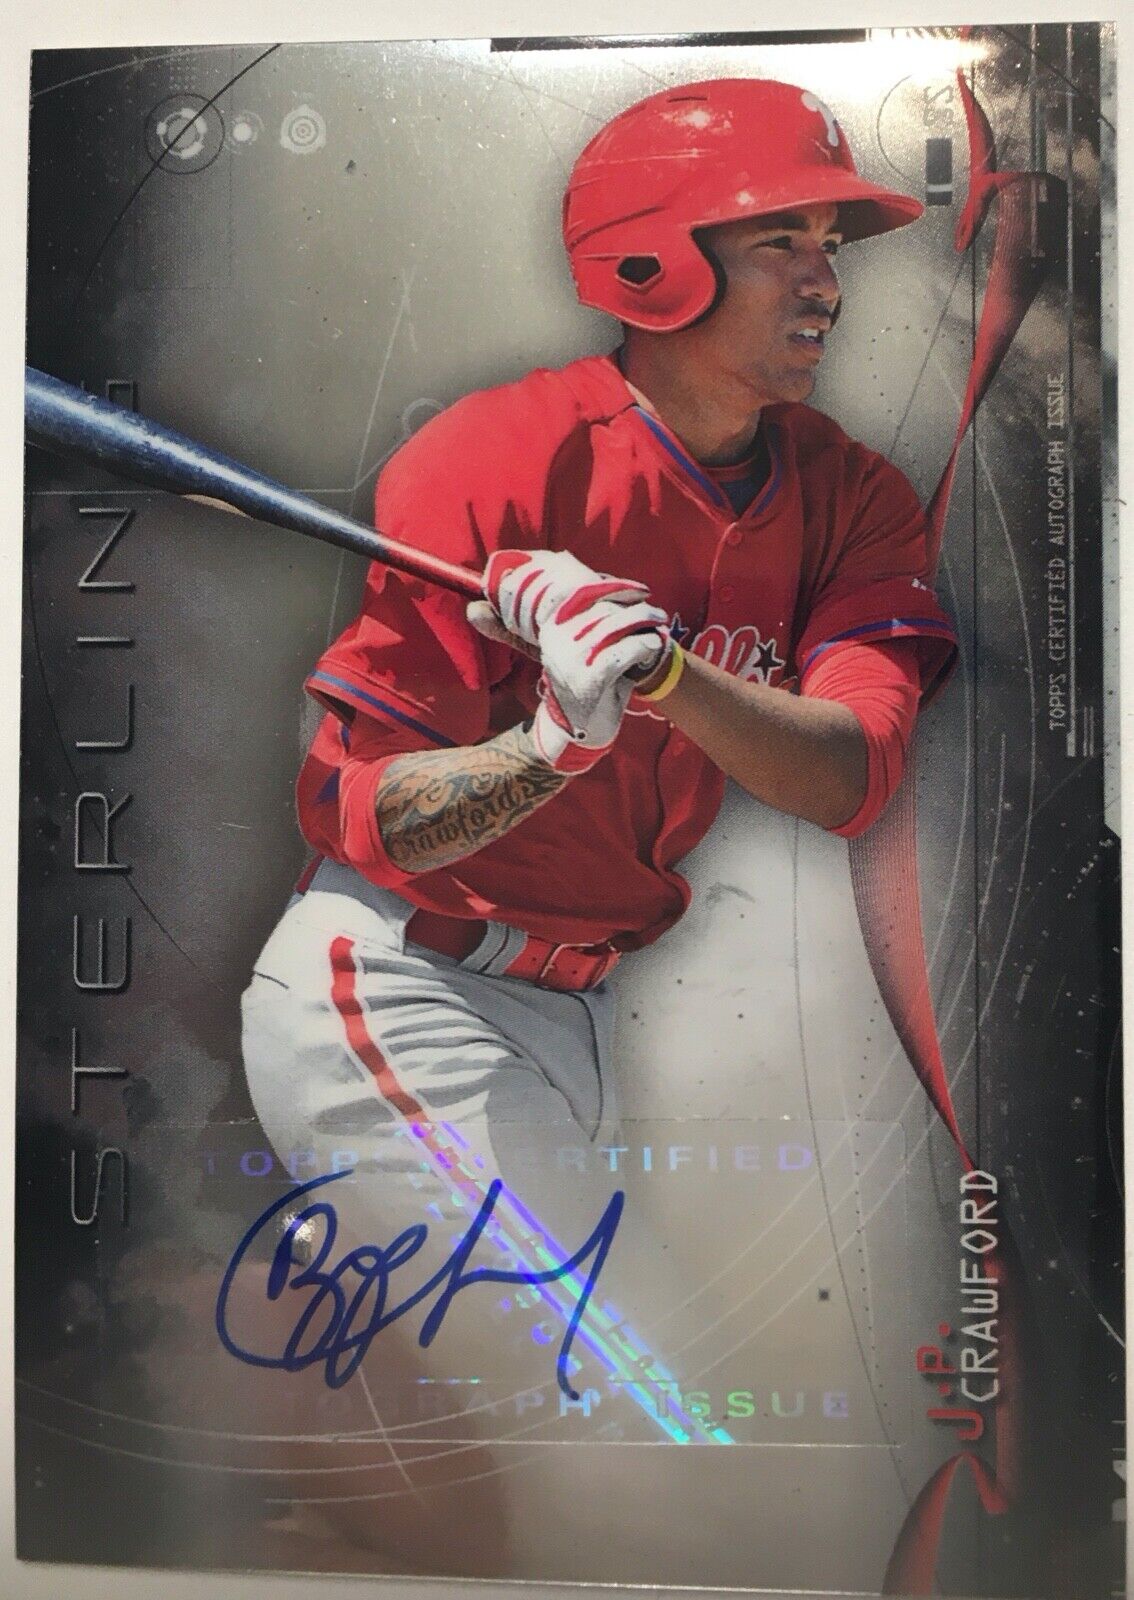 2014 Bowman Sterling J. P. CRAWFORD autograph, BSPA-JC, Phillies/Mariners